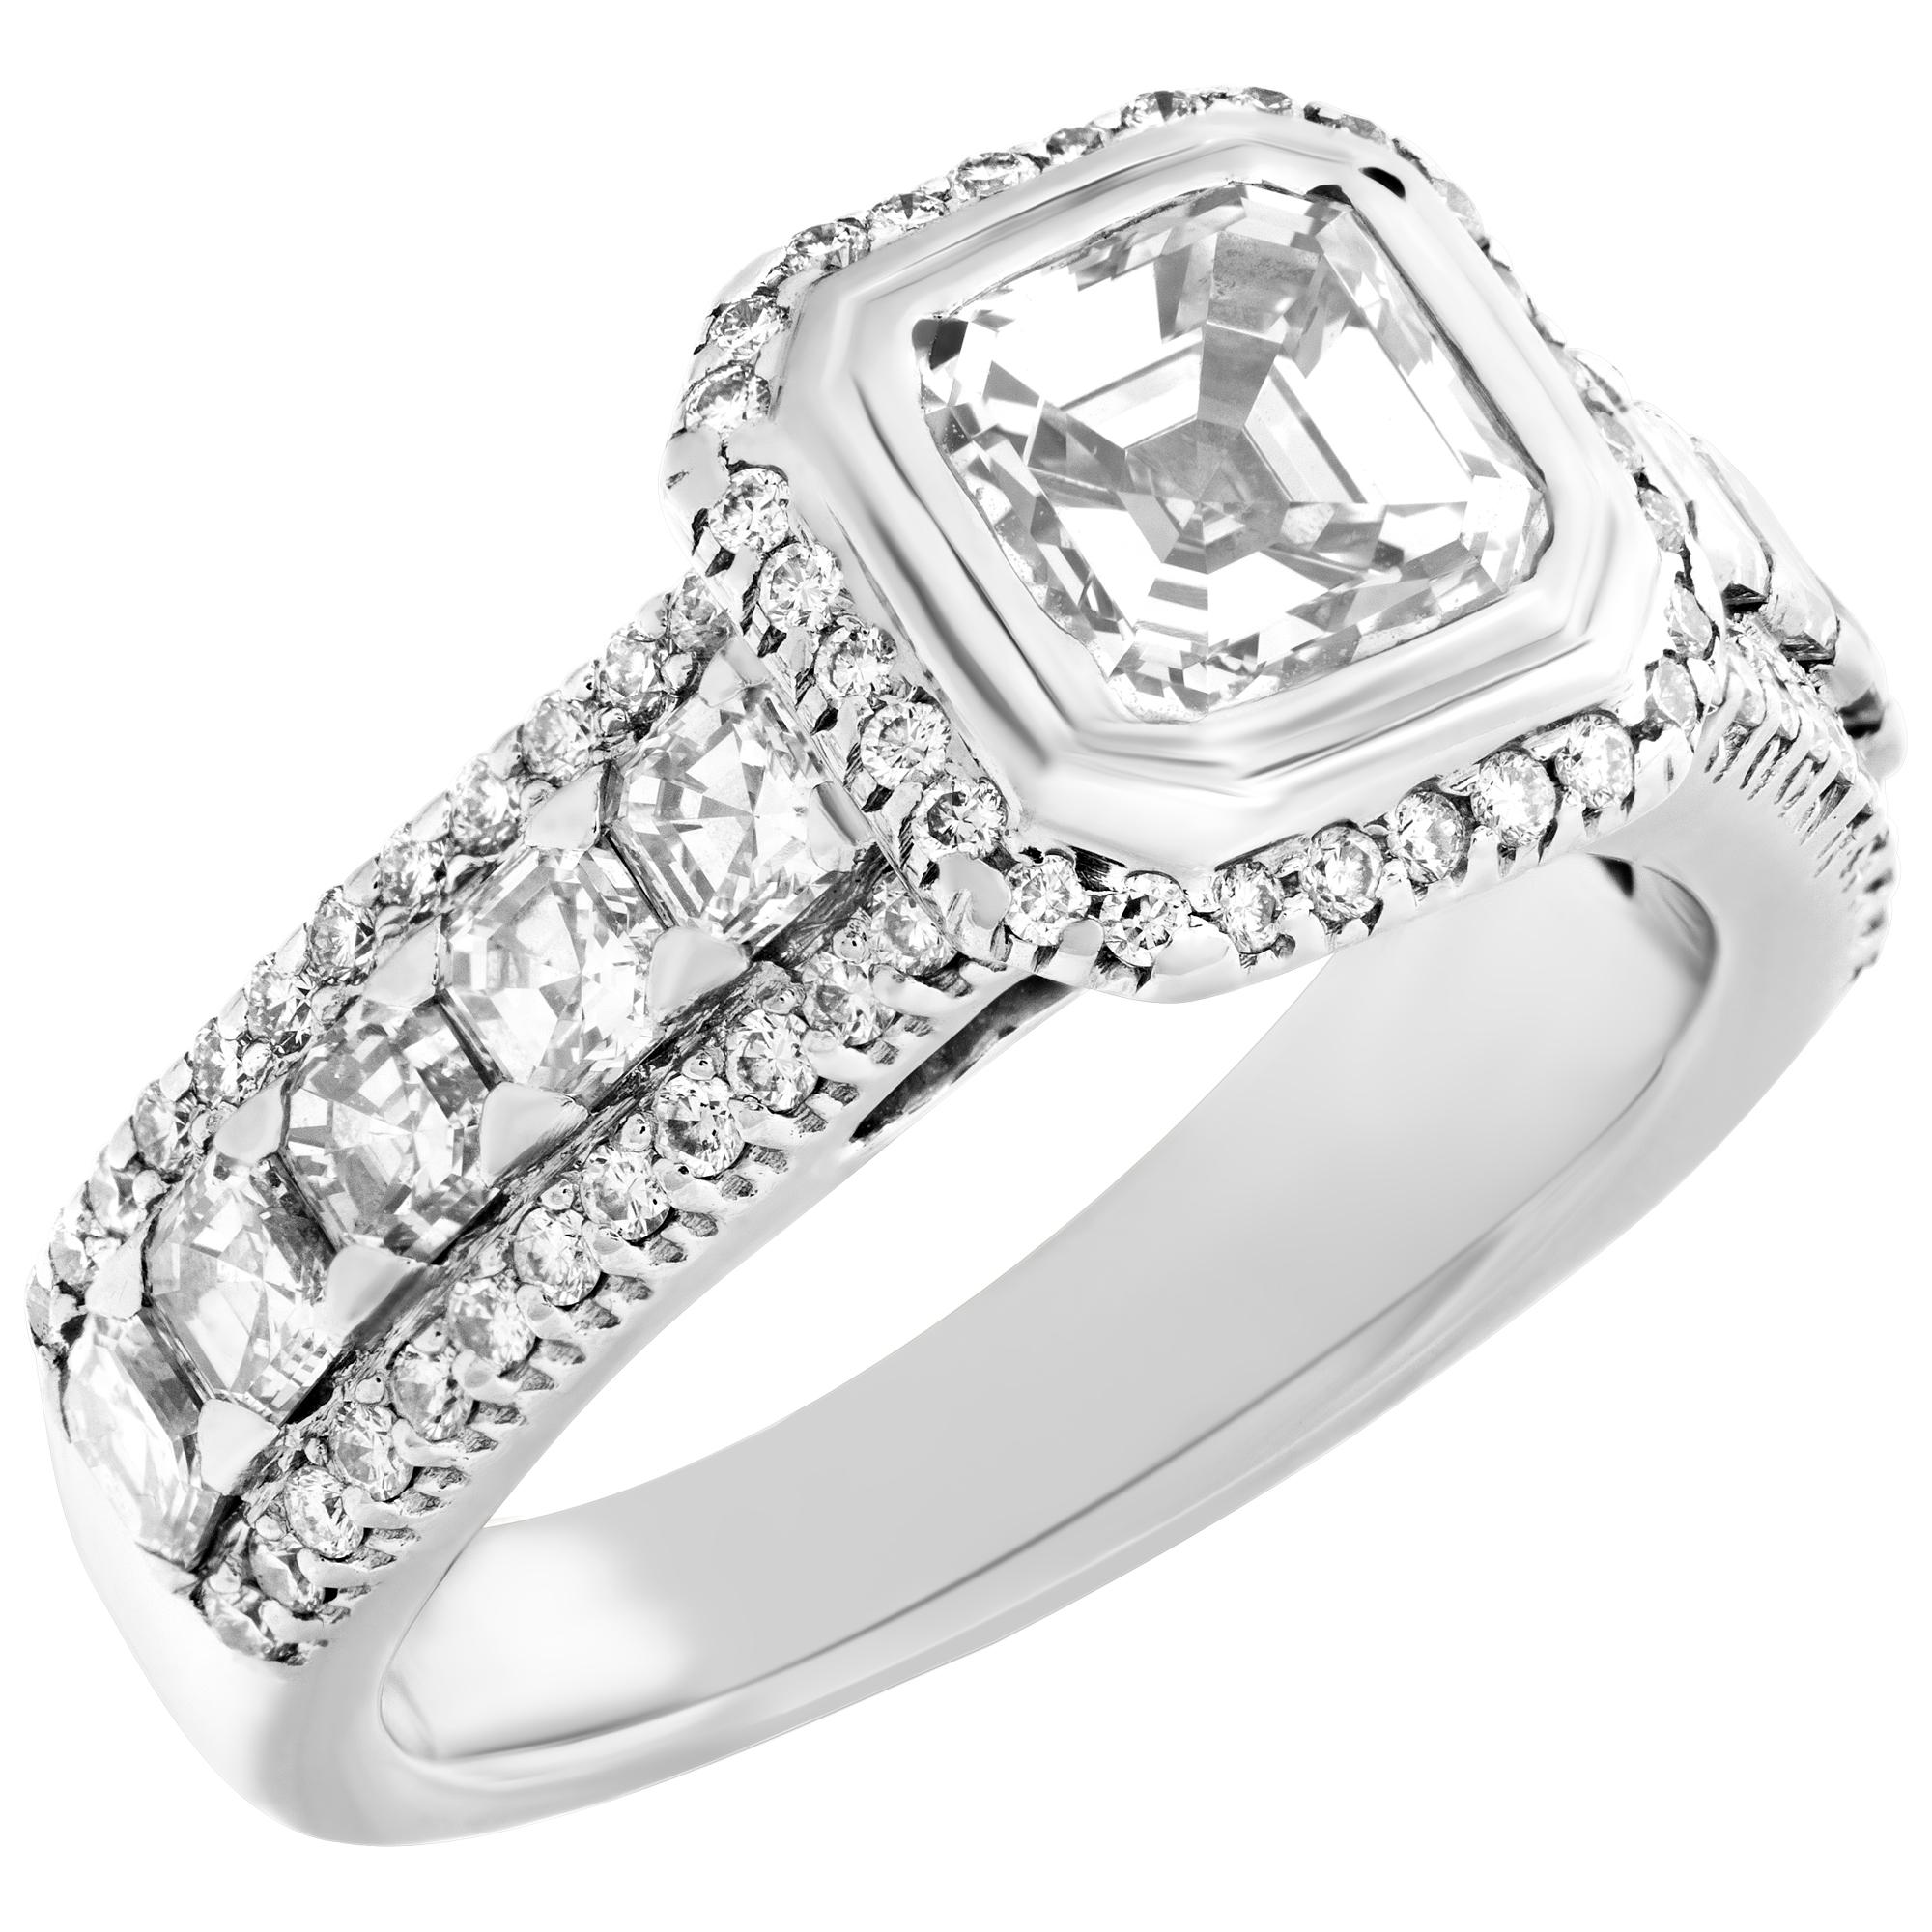 White gold diamond ring w/ mounted diamond set in white gold w/ diamond accents In Excellent Condition For Sale In Surfside, FL